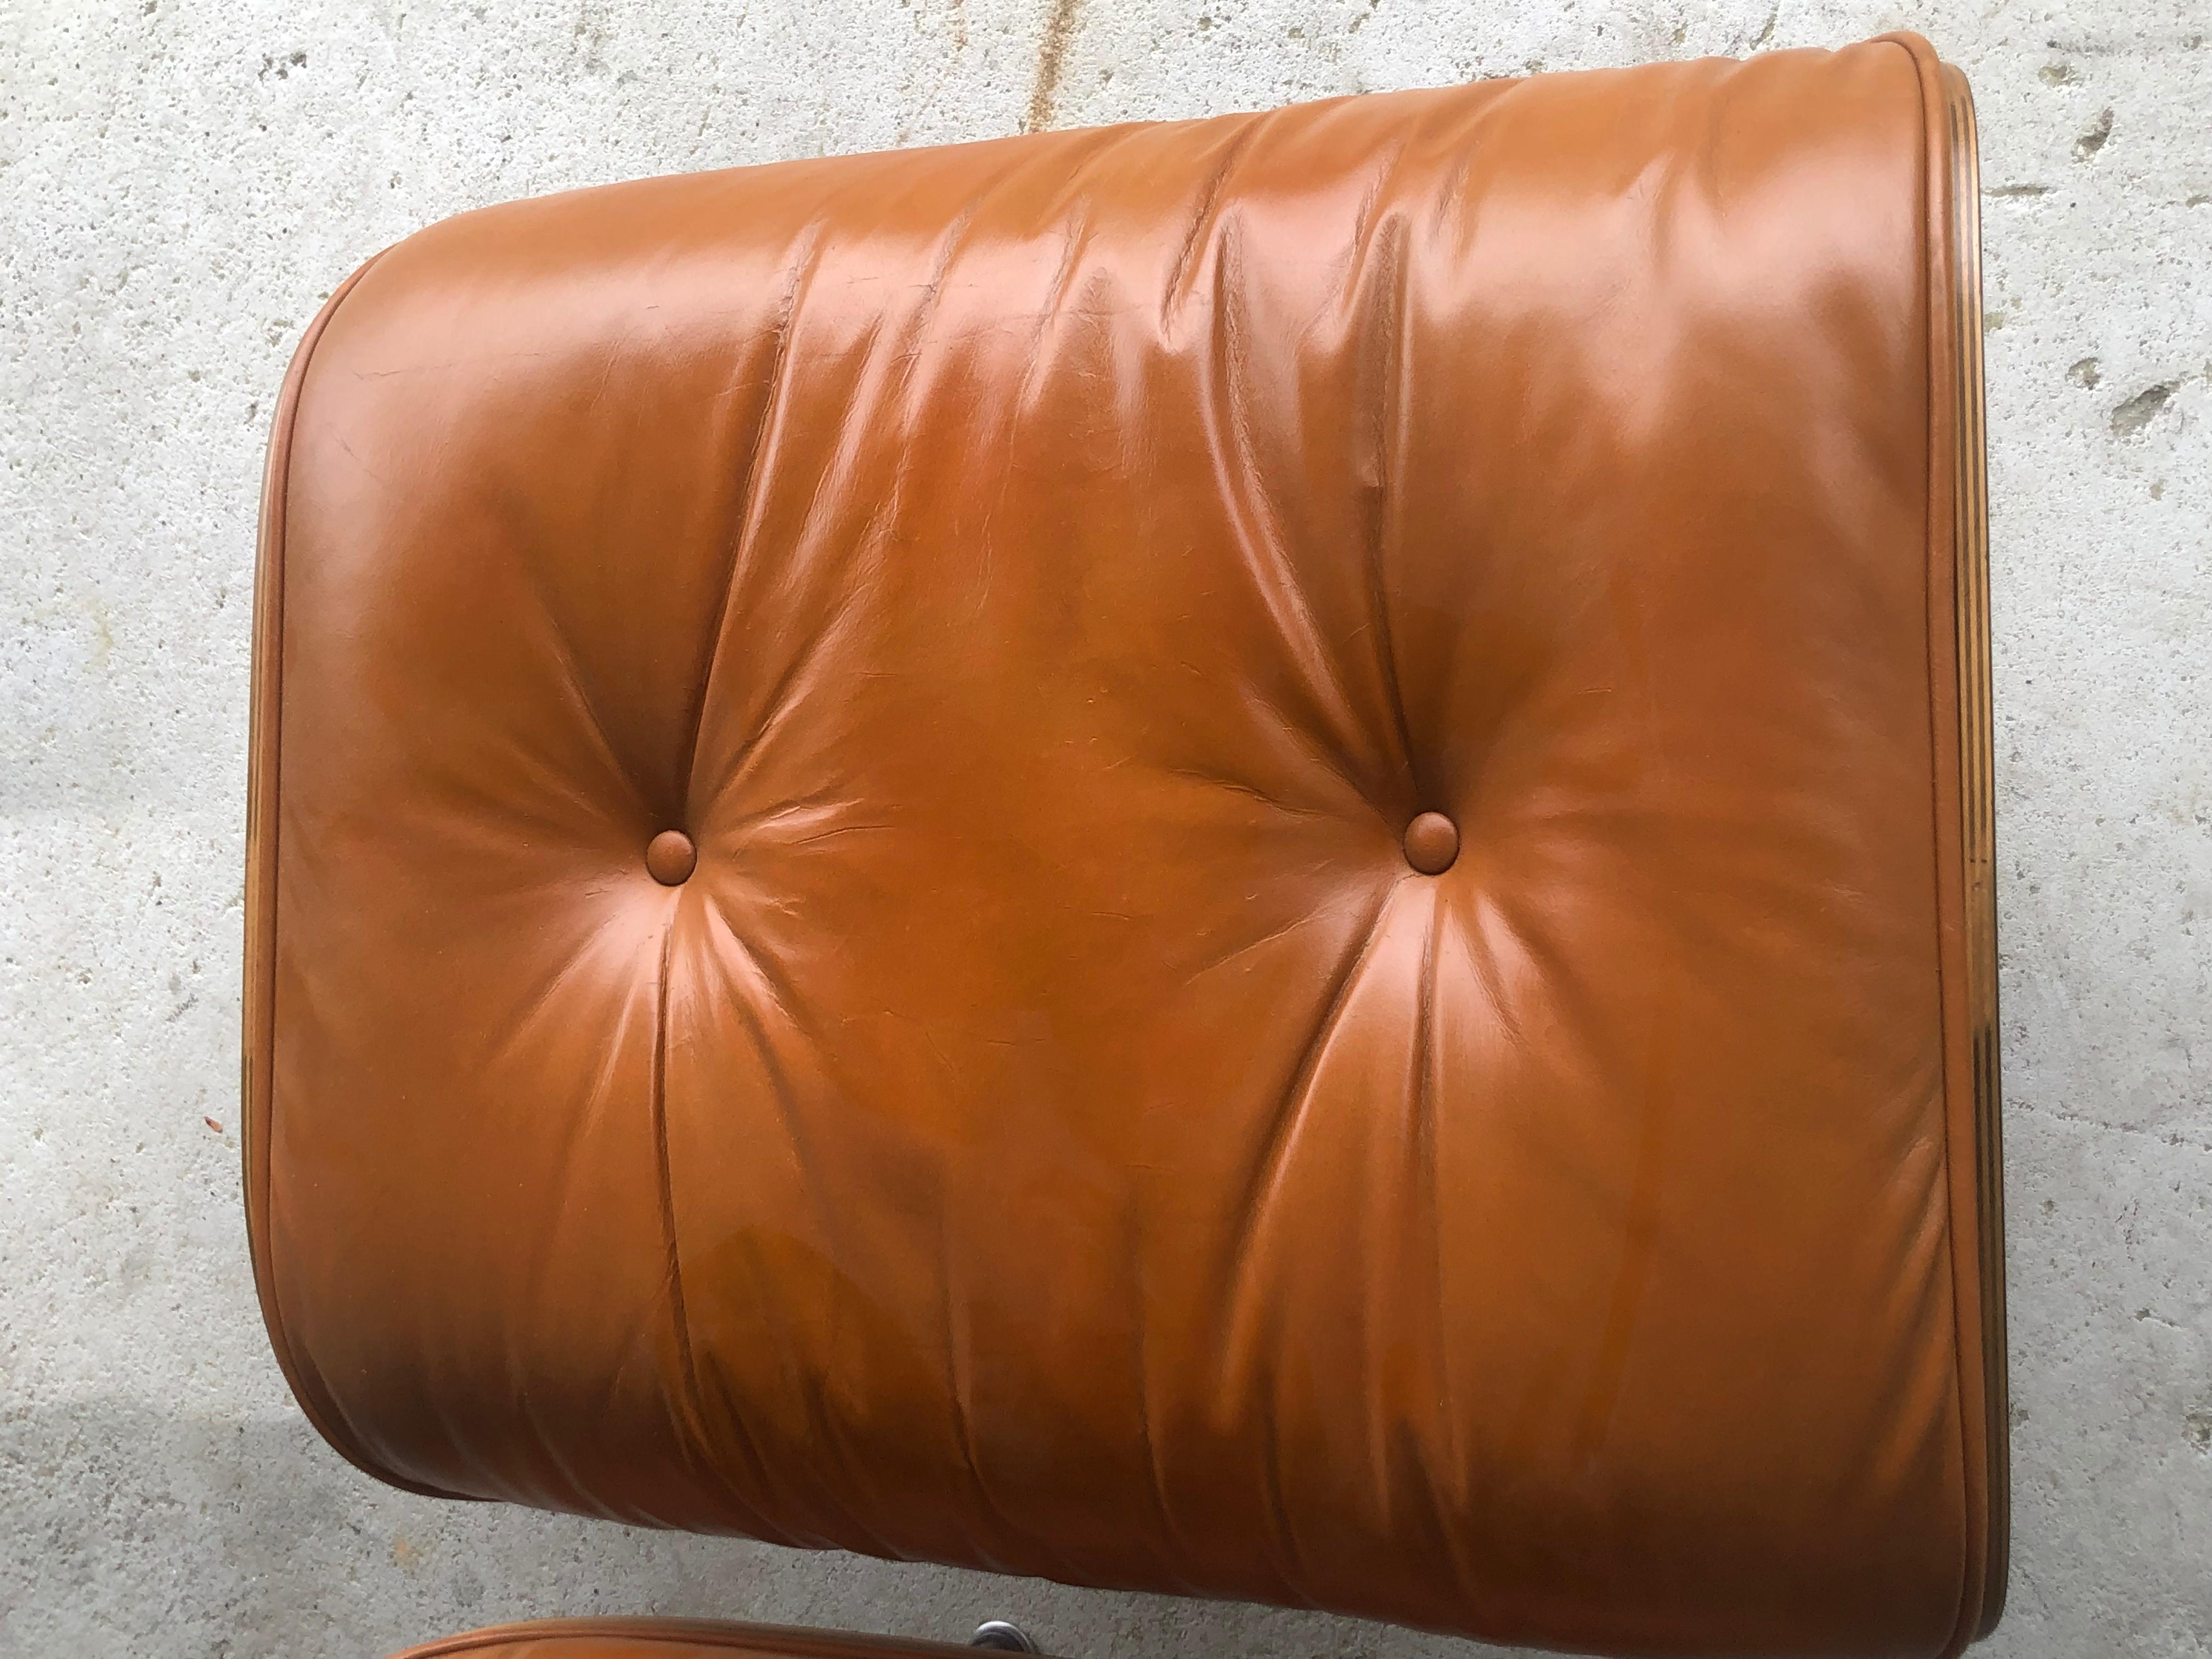 Beautiful Eames lounge chair and ottoman in rosewood and burnt orange leather. Vintage chair and ottoman with new leather. Signed and guaranteed authentic Herman Miller chair and ottoman from the 1960s/1970s. Leather cushions are custom made and